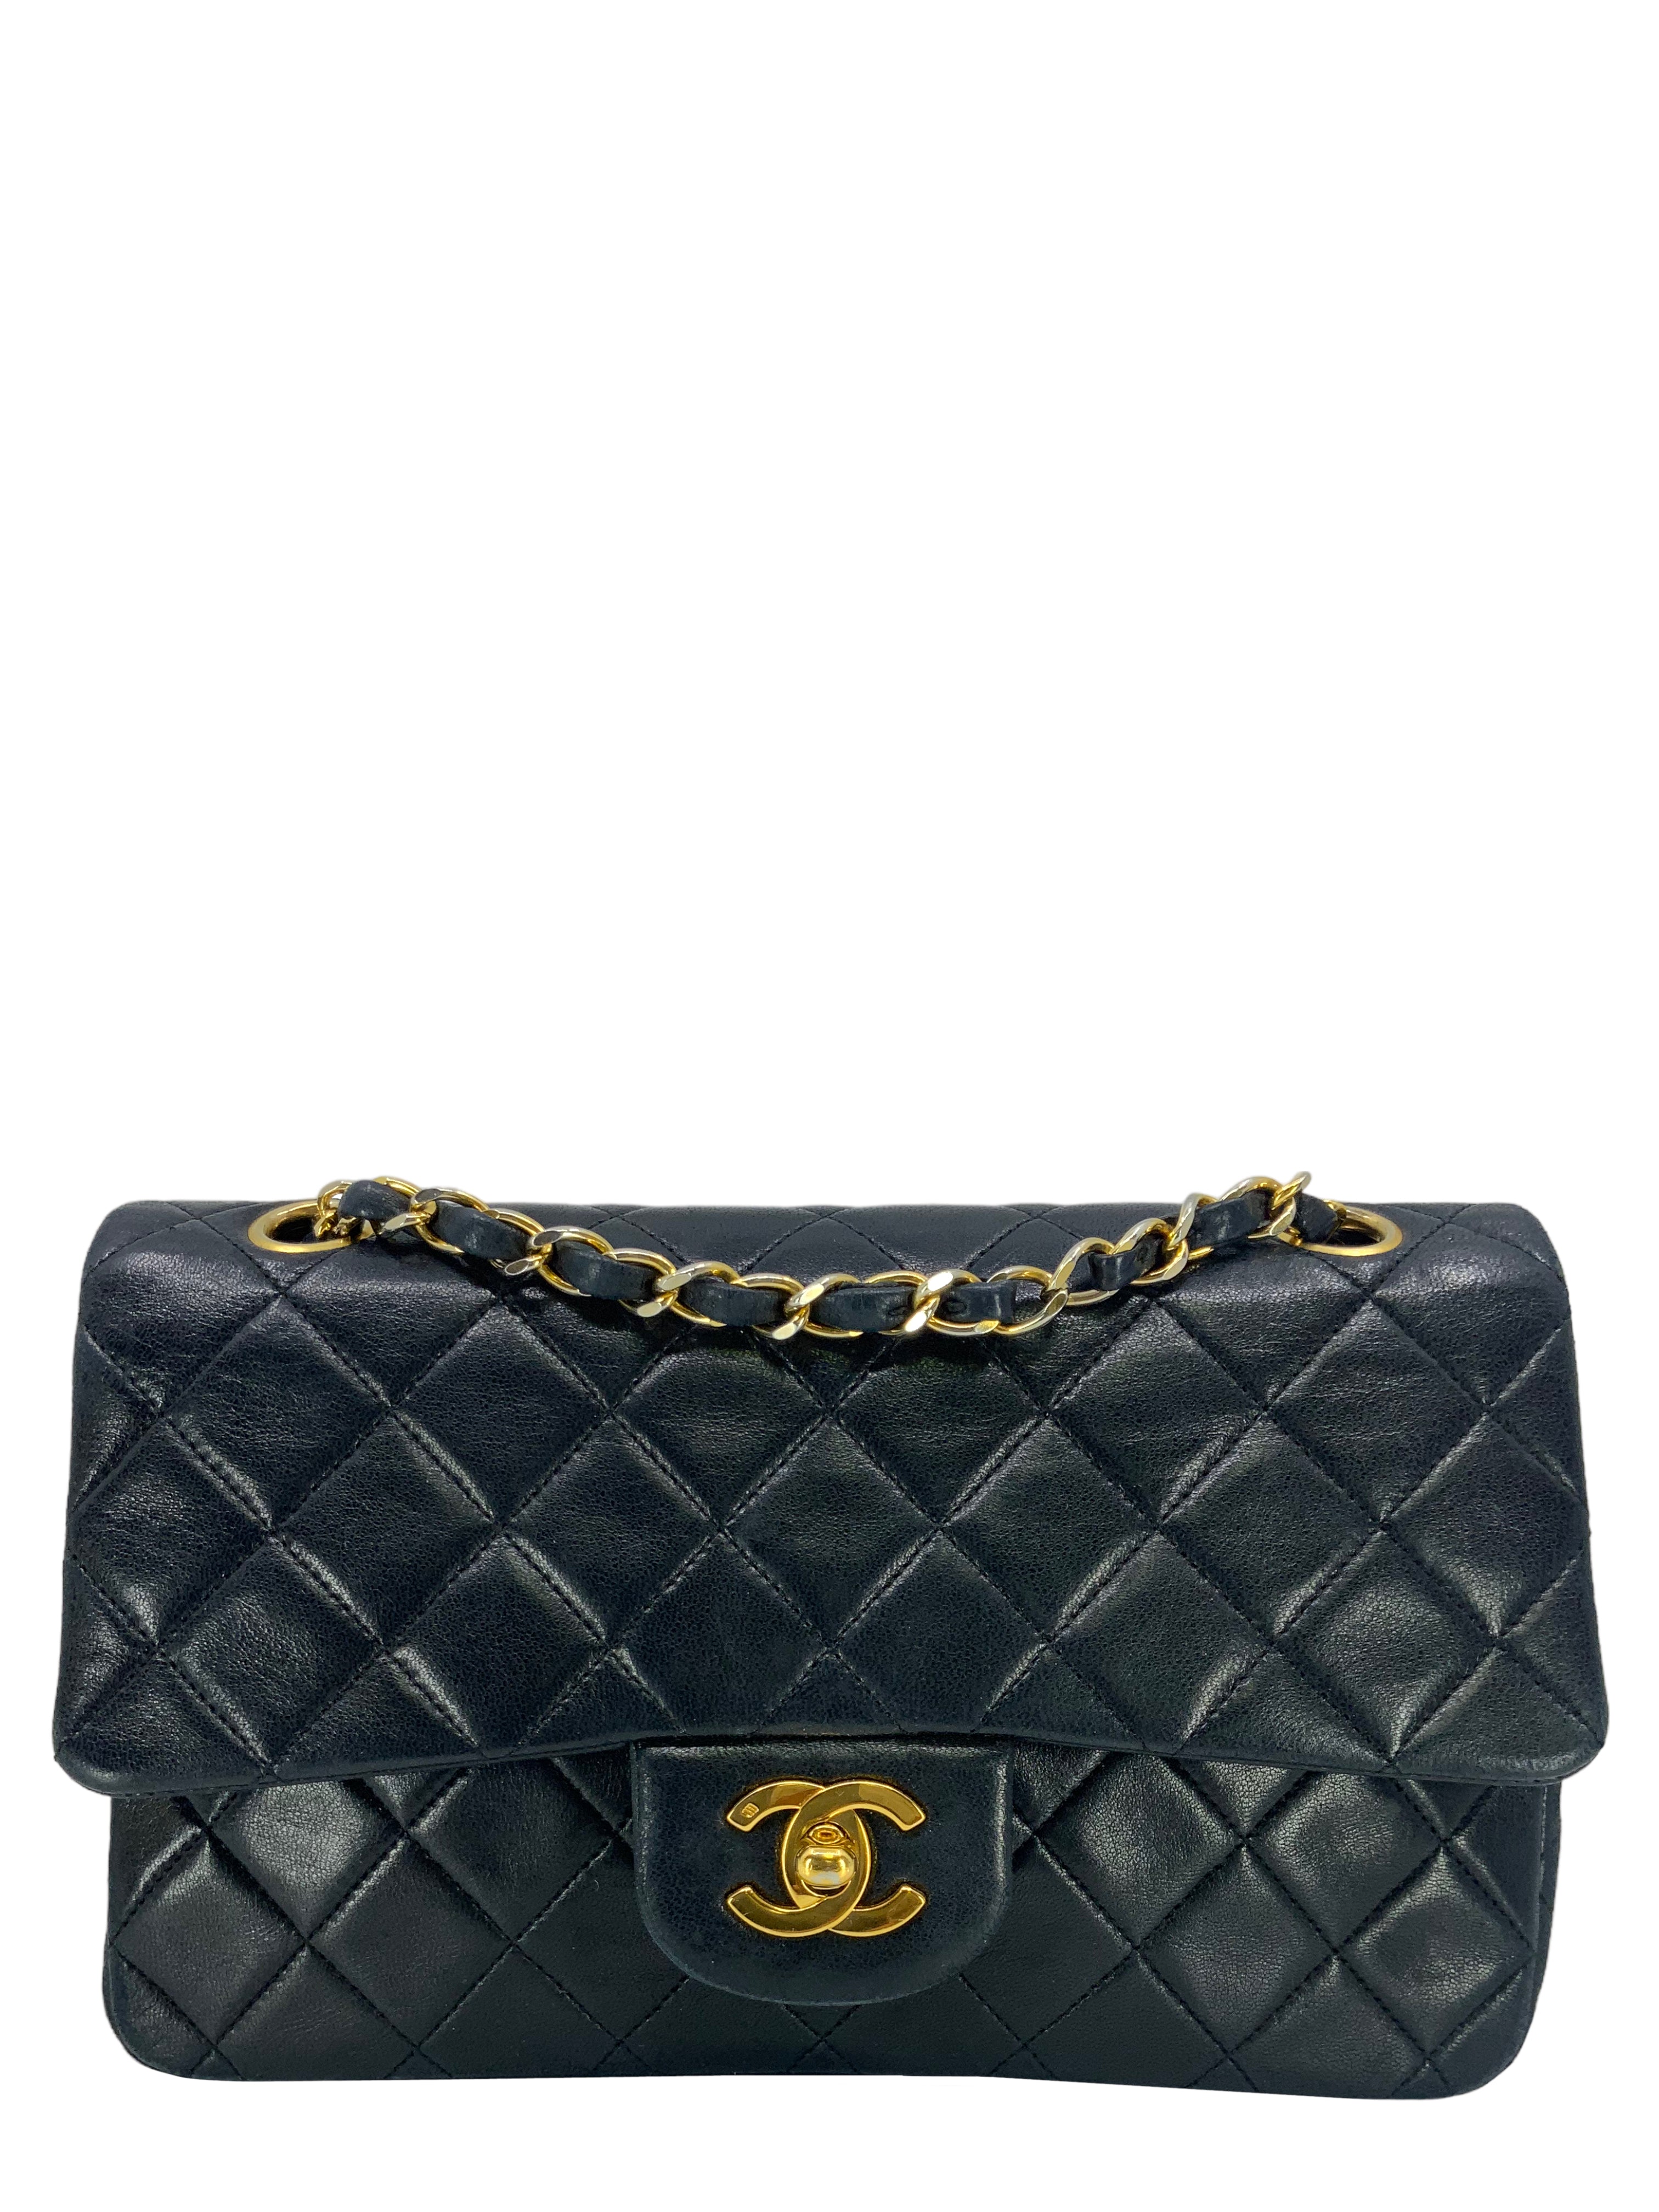 Chanel Quilted Lambskin Small Classic Double Flap Bag - Consigned